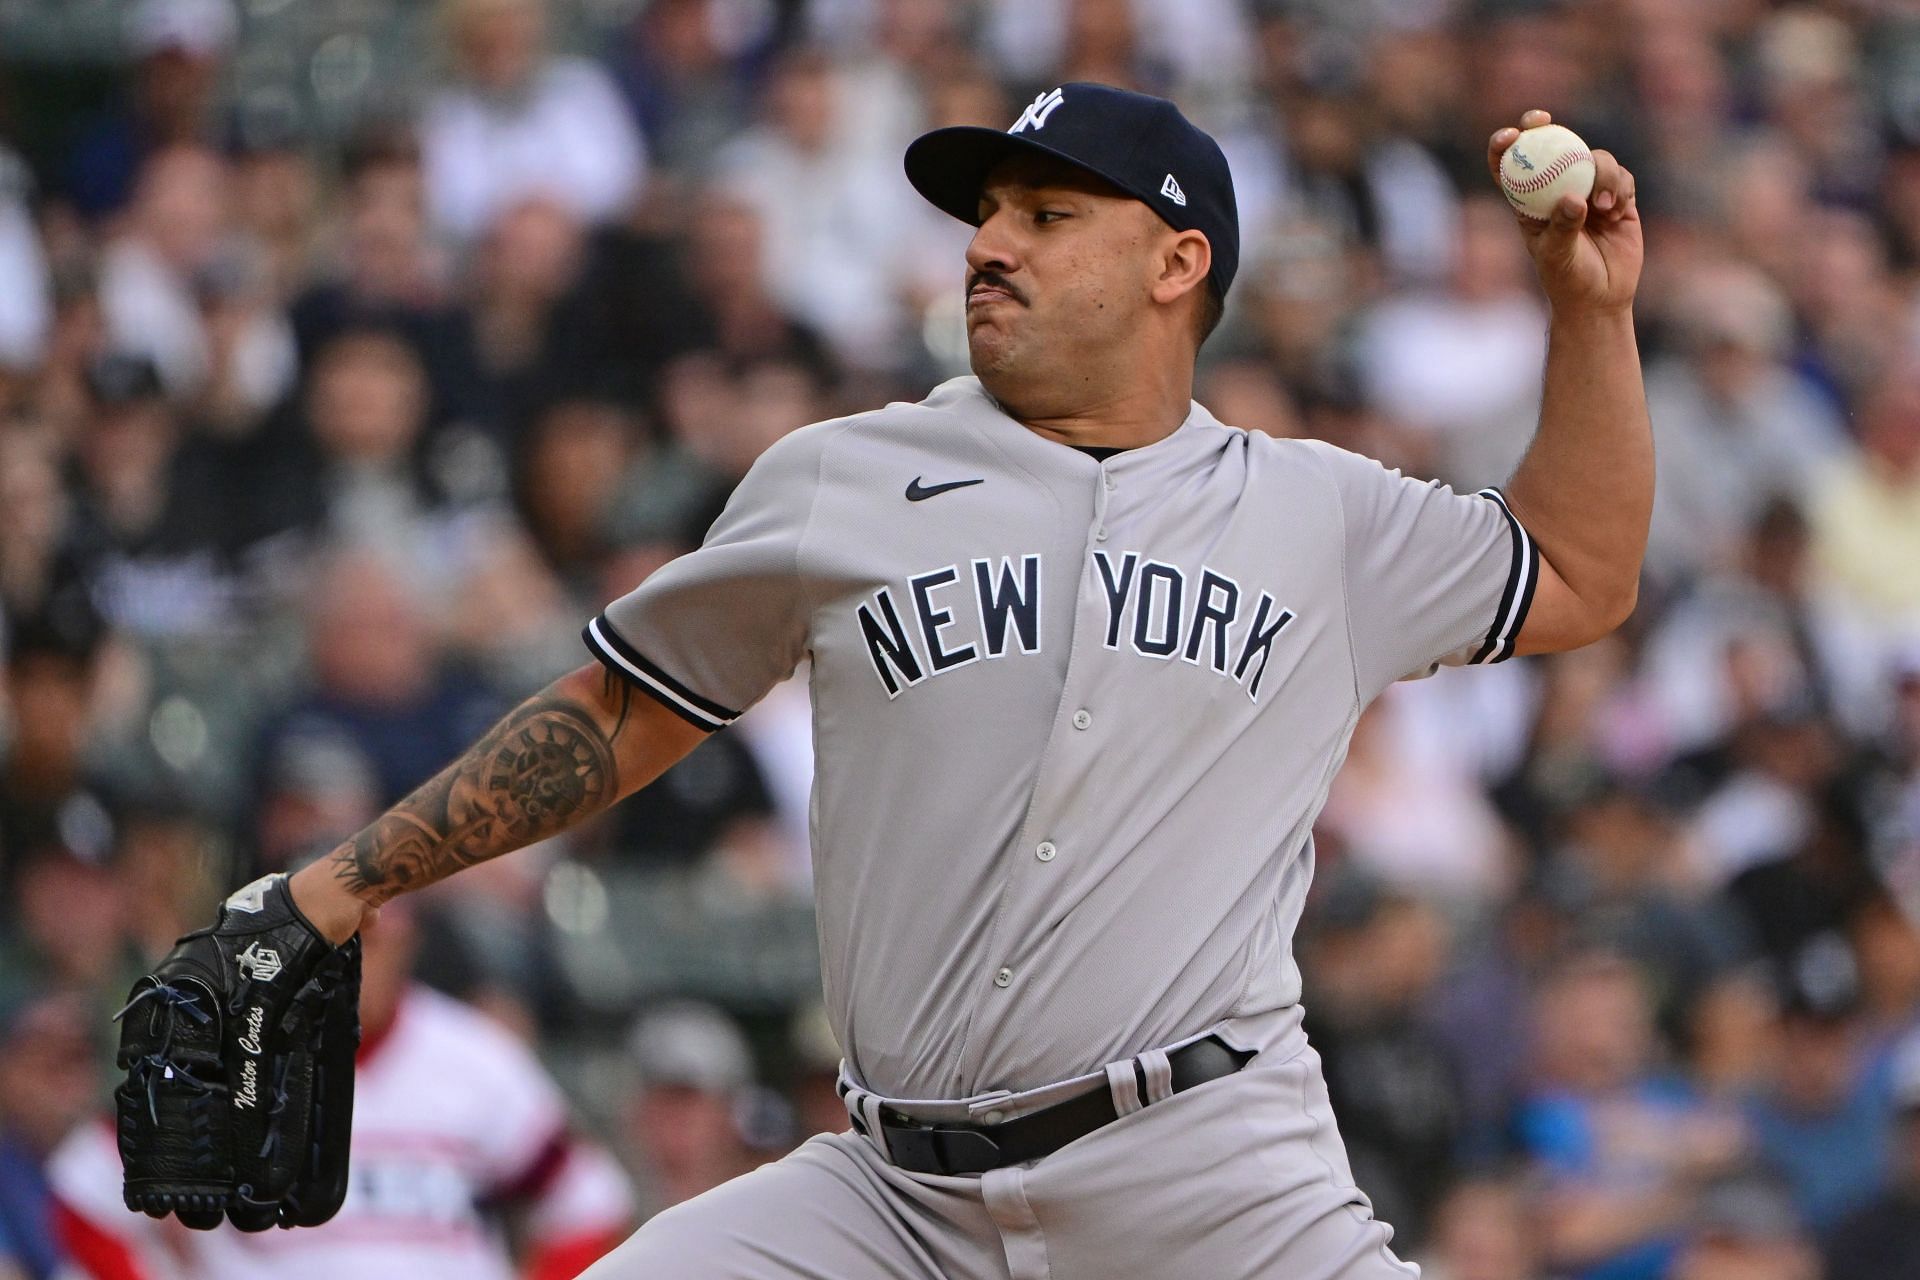 New York Yankees pitcher Cortes pitched eight innings and allowed only one run against the White Sox on Sunday. Following the game, some offensive old tweets resurfaced.